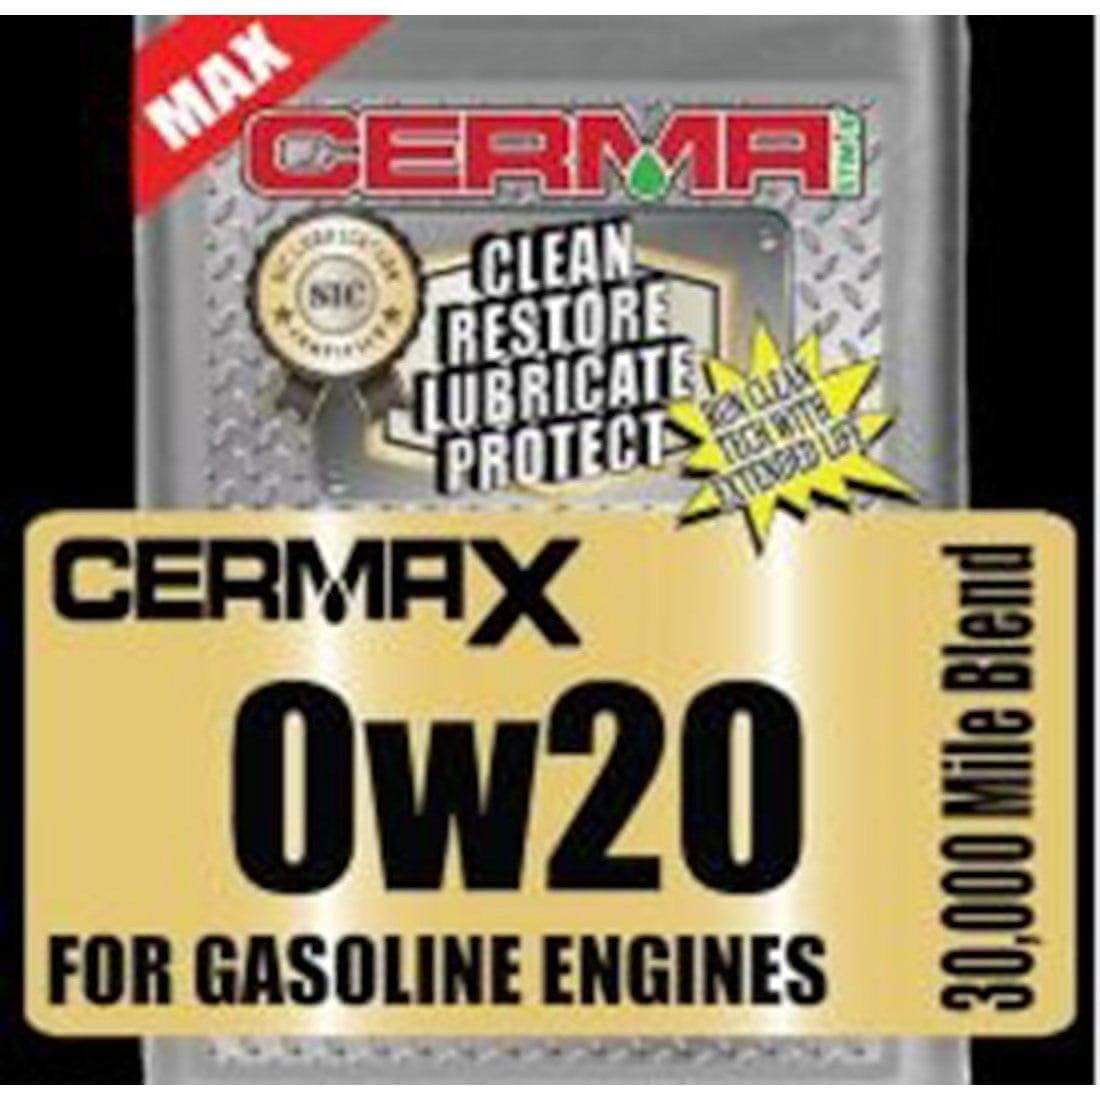 Cermax Ceramic 0w-20W Synthetic Motor Oil at $18.11 only from cermatreatment.com